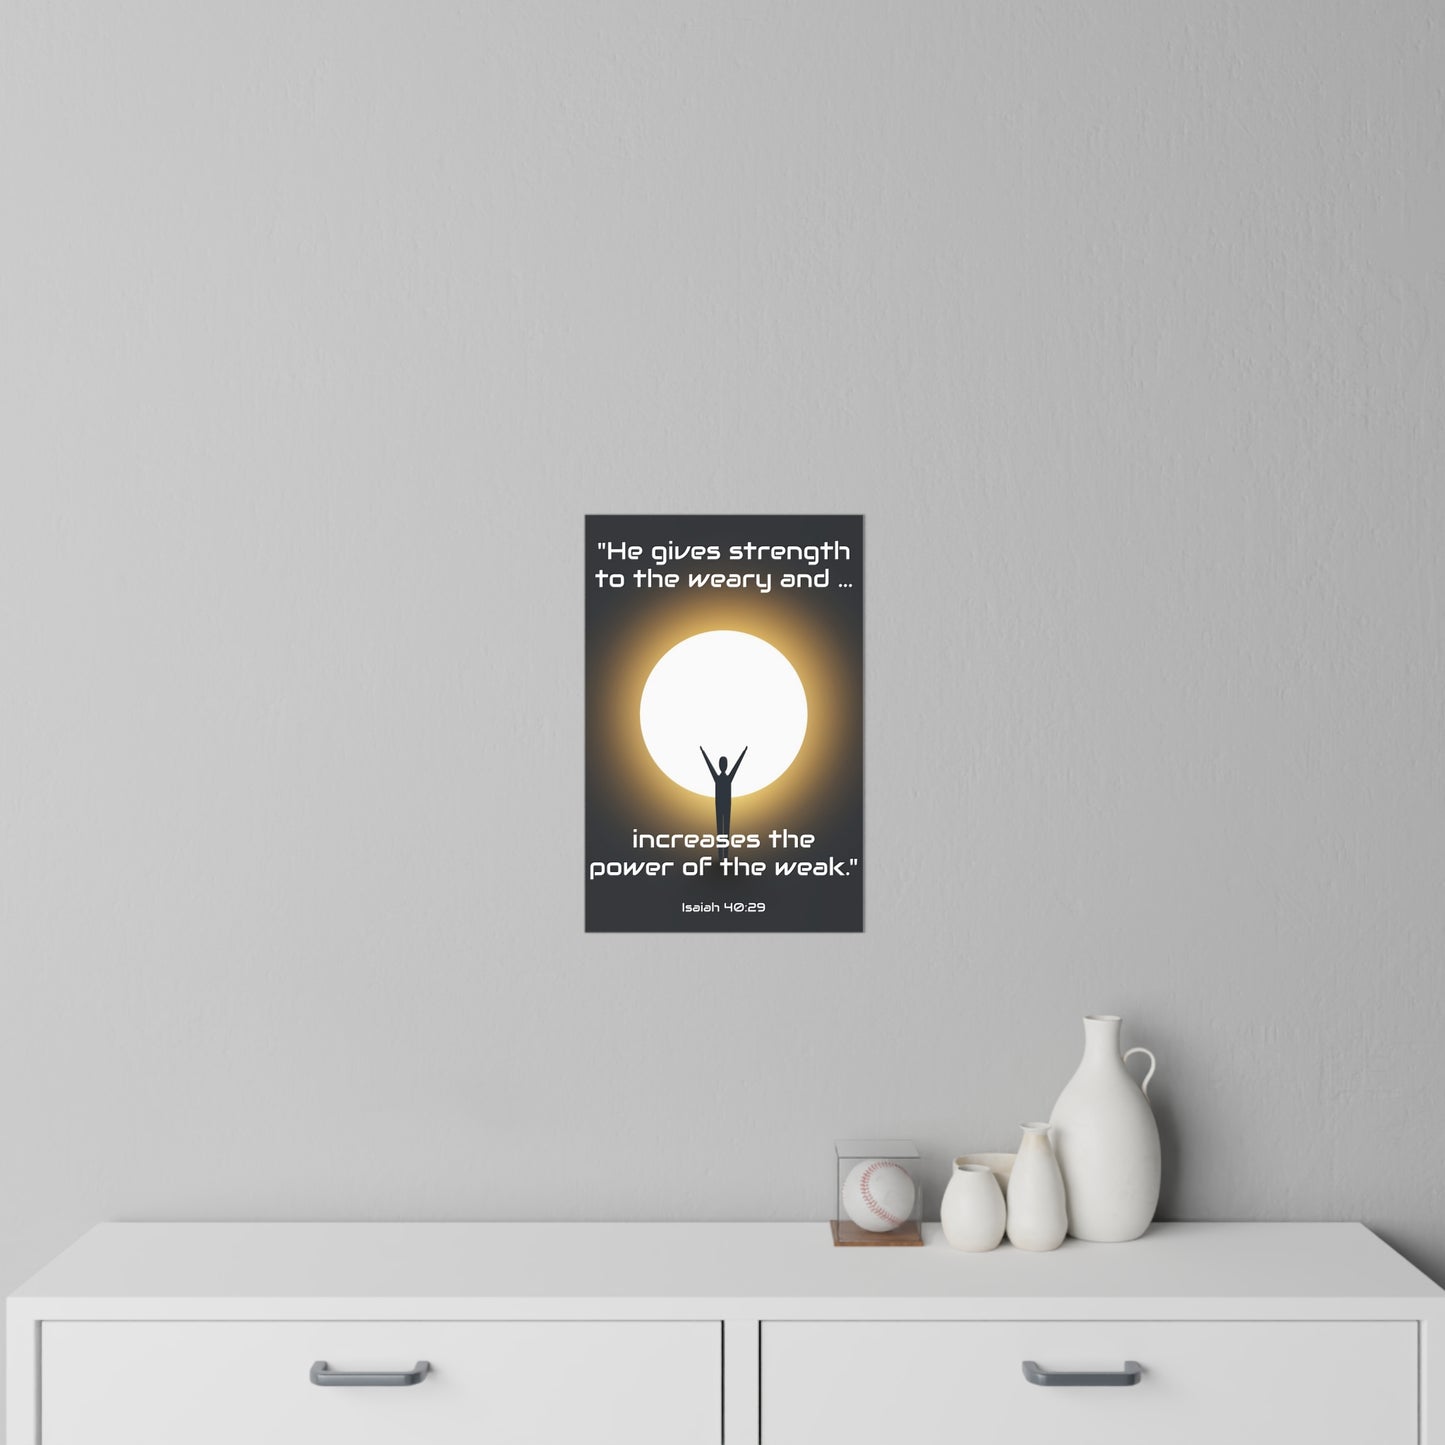 Inspirational Wall Decals for Bedroom - Durable & Repositionable with Bible Verse | Art & Wall Decor,Decor,Home & Living,Indoor,Magnets & Stickers,Posters,Stickers,TikTok